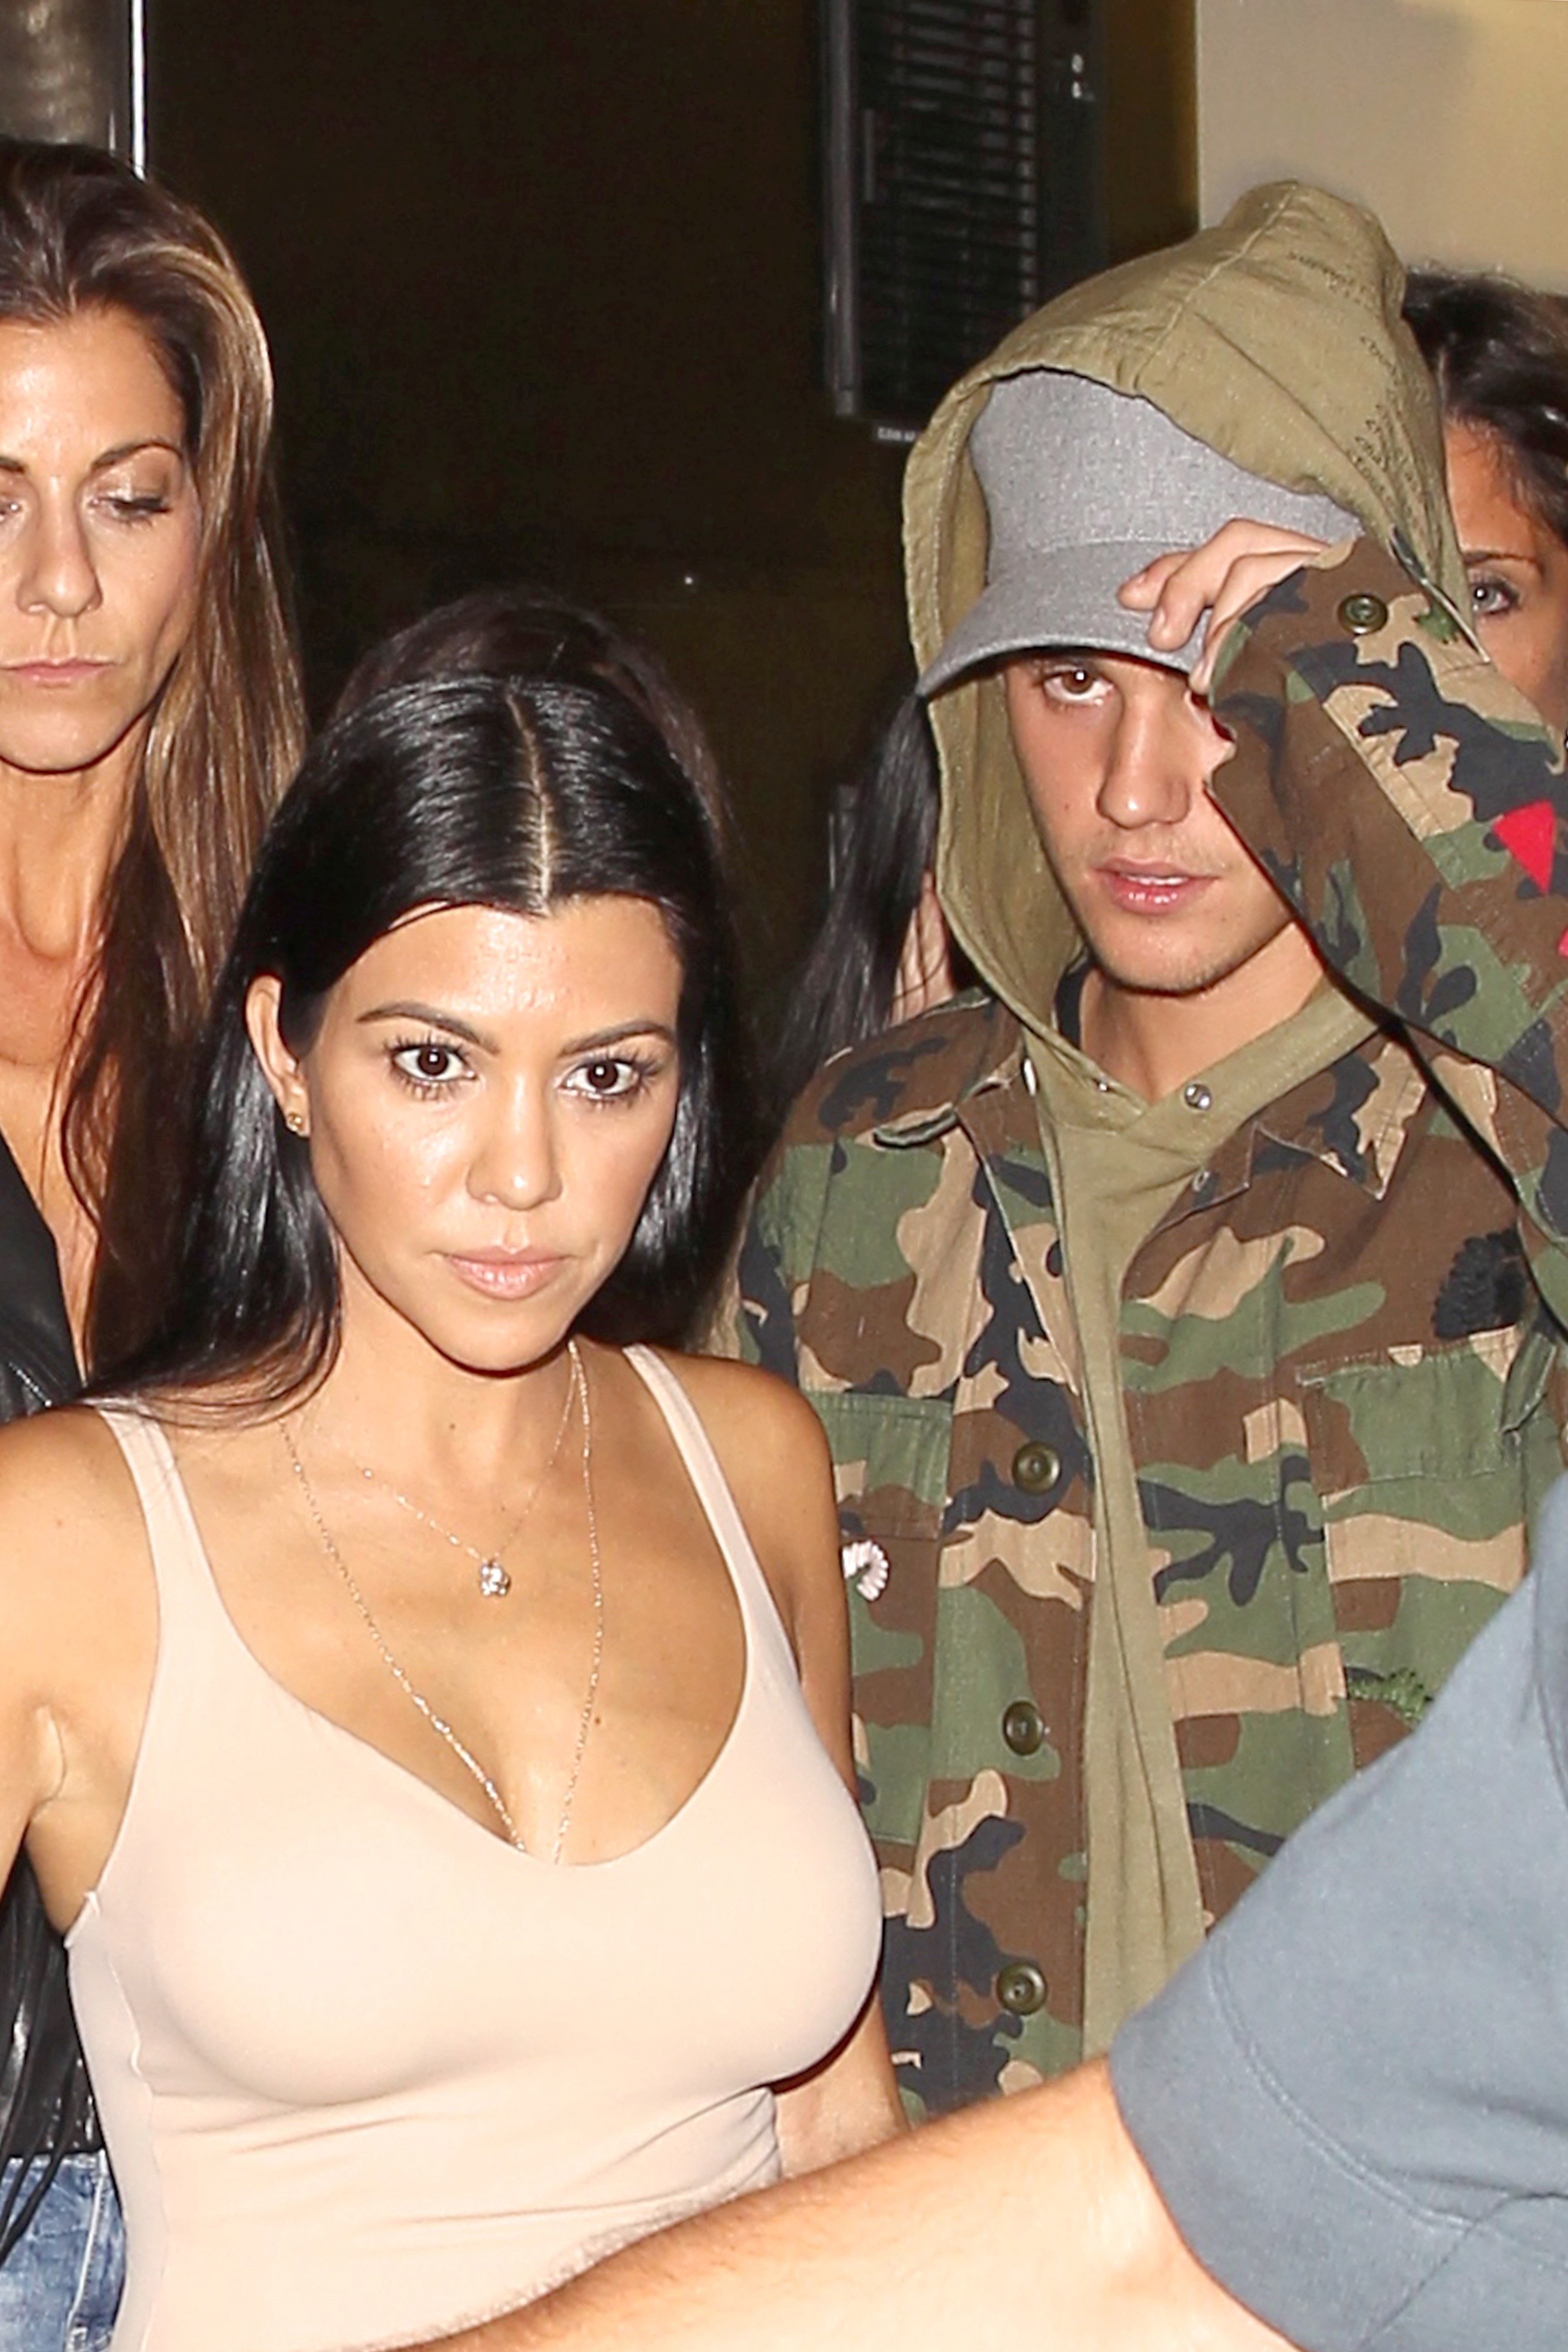 Kourtney and Justin walk together; her in a tank top and him in a camouflage hoodie and cap. They appear to be avoiding the camera